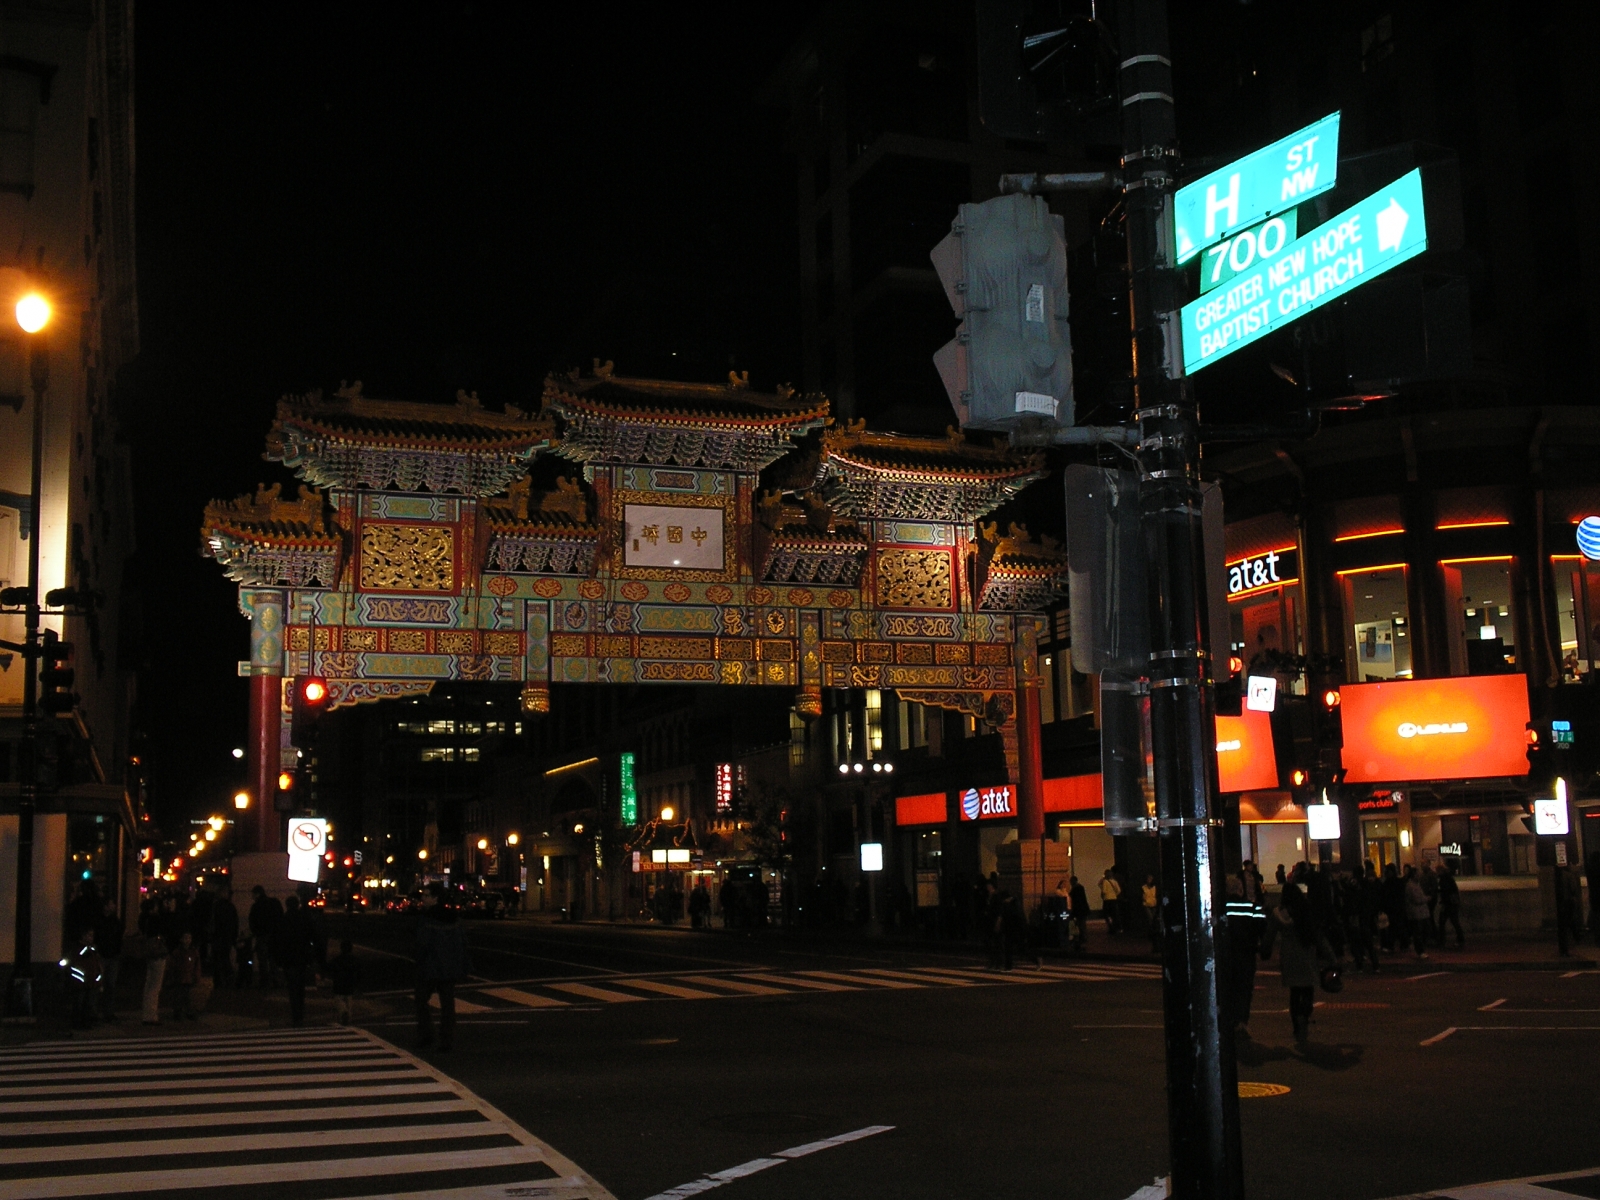 The entrance to the Chinatown district of D.C.